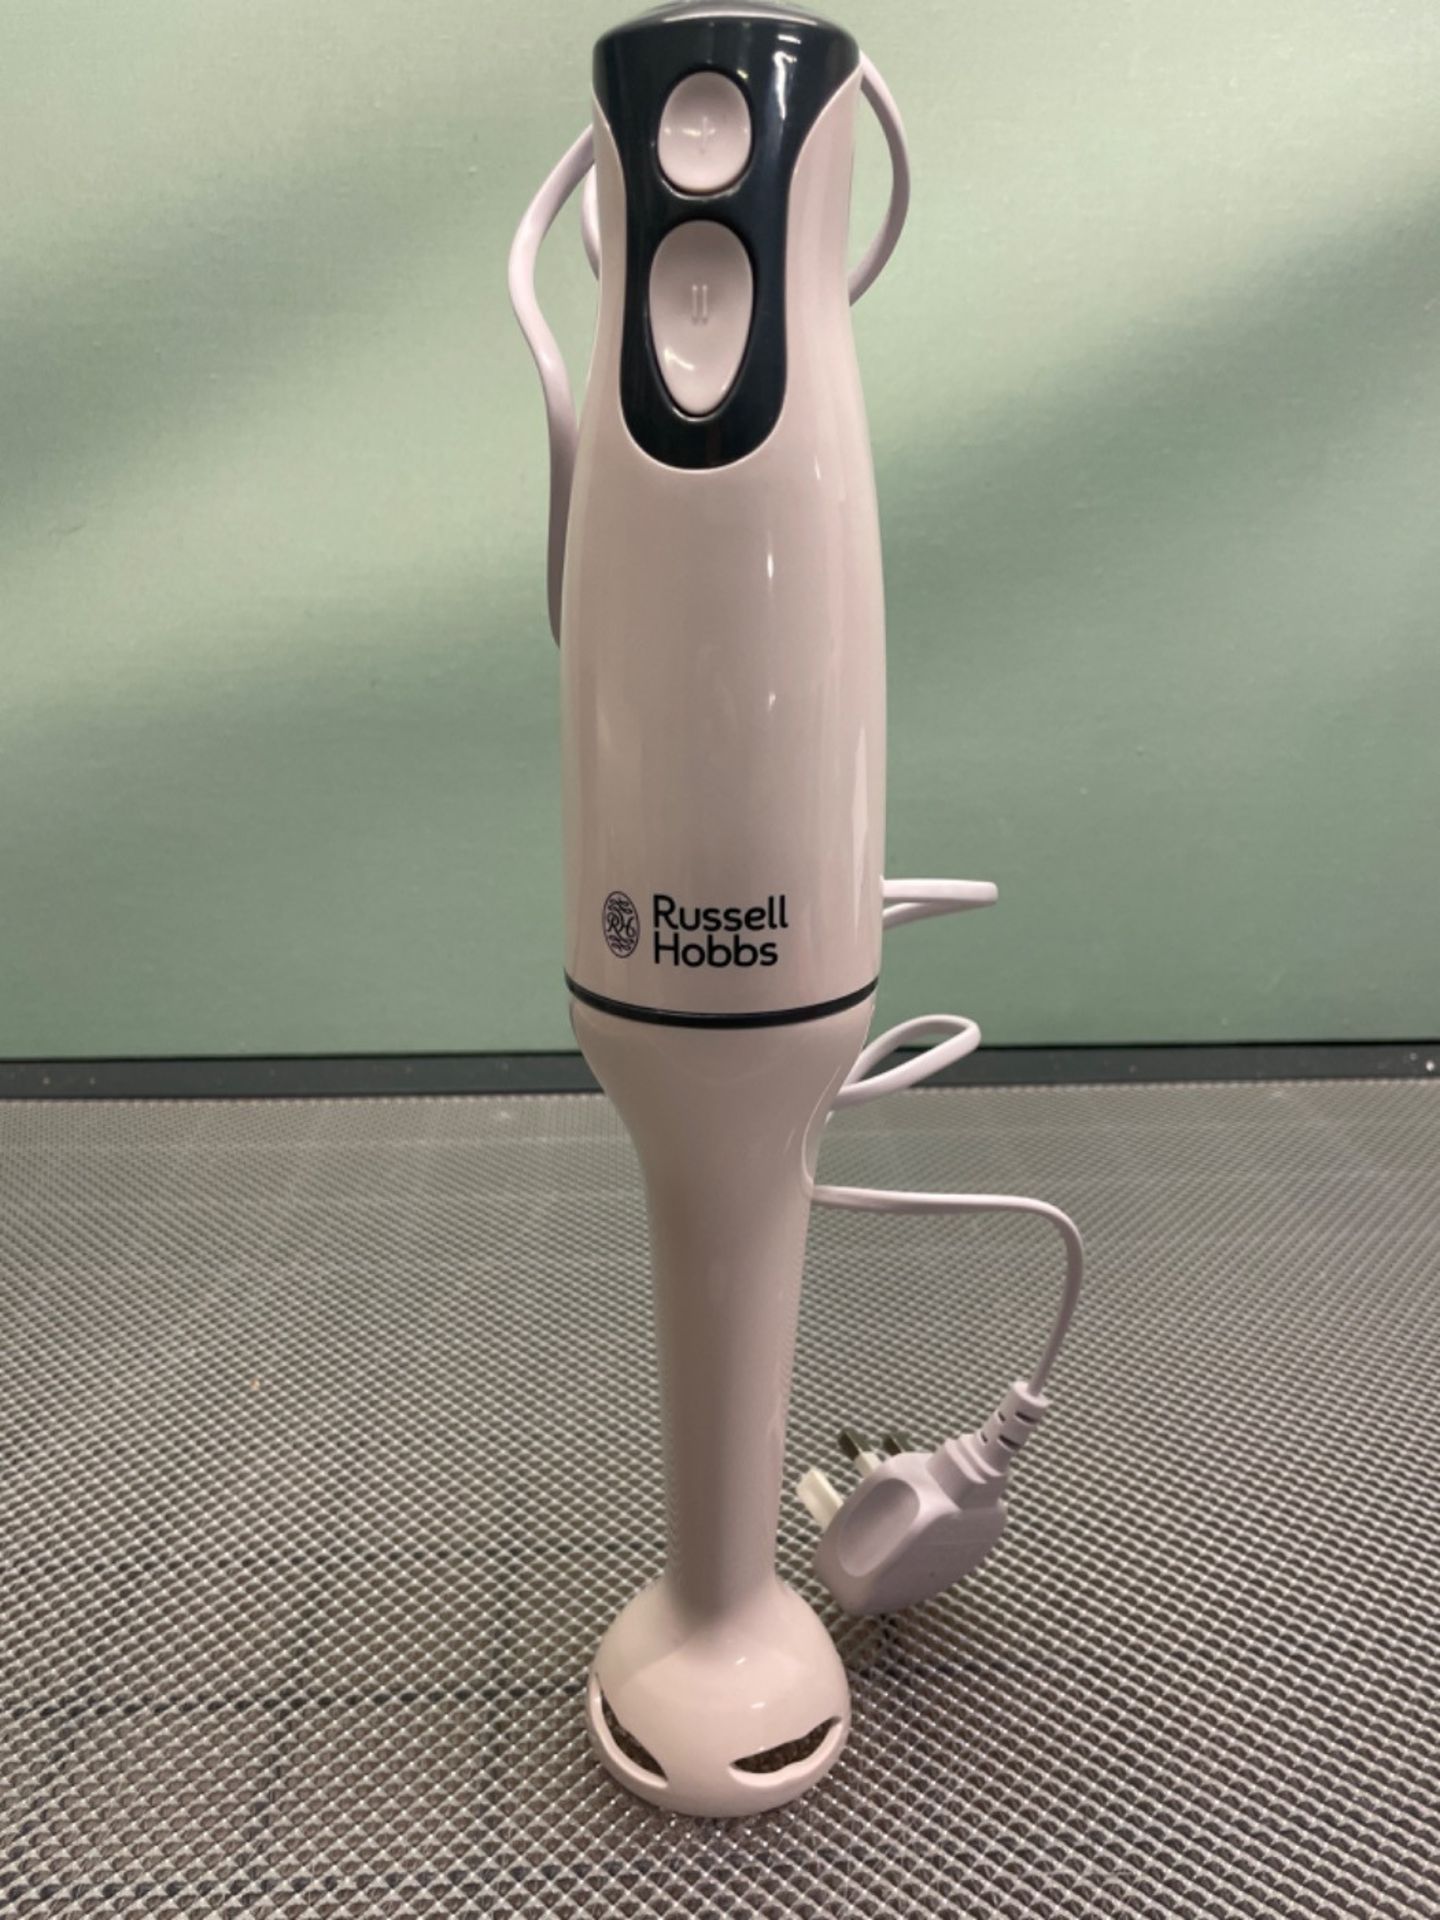 Russell Hobbs Food Collection Electric Hand Blender, 2 Speeds and Pulse Technology, Detachable blen - Image 3 of 3